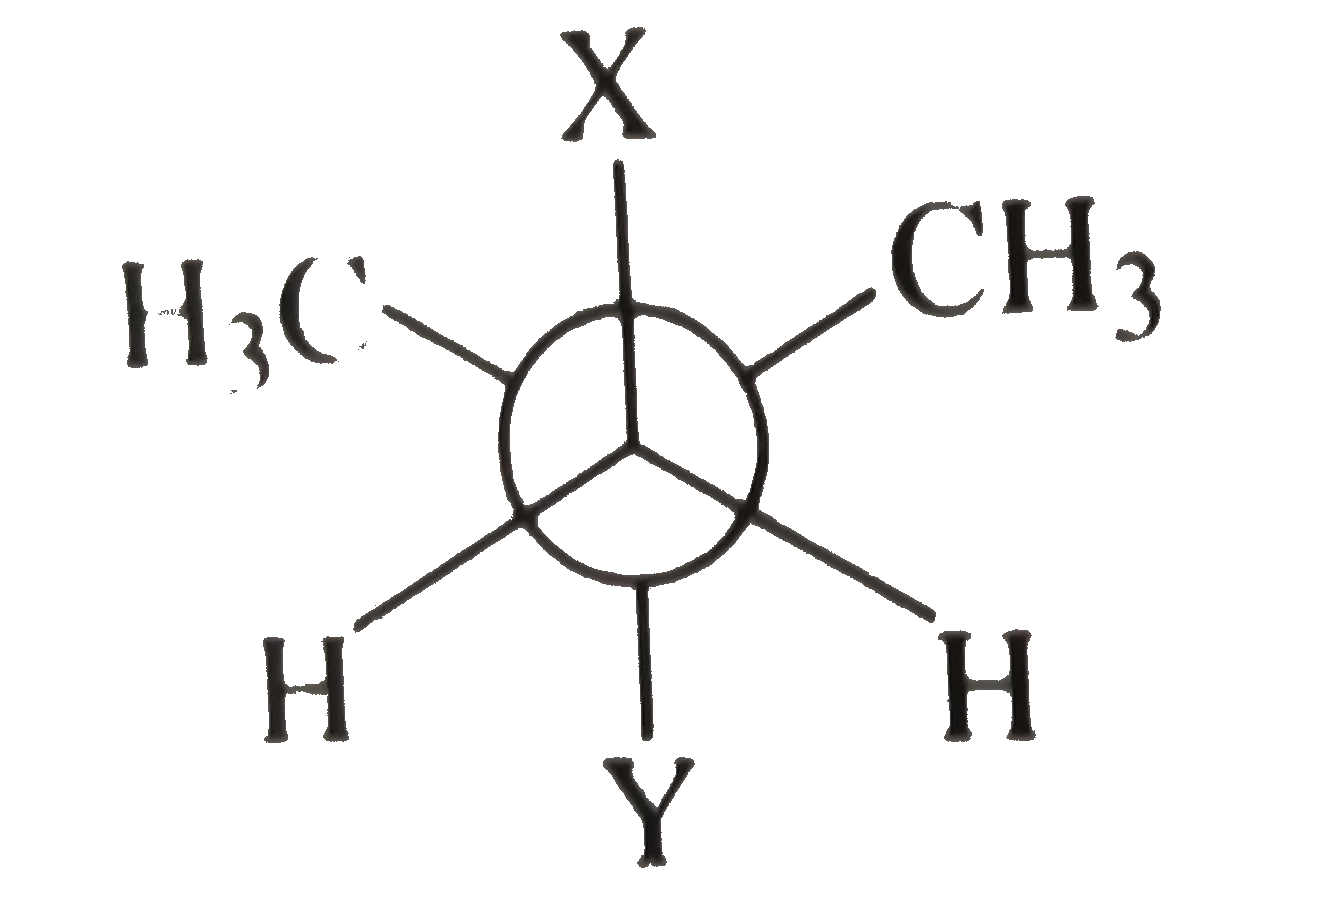 In the Newman projection for 2,2 dimethylbutane X and Y can, res